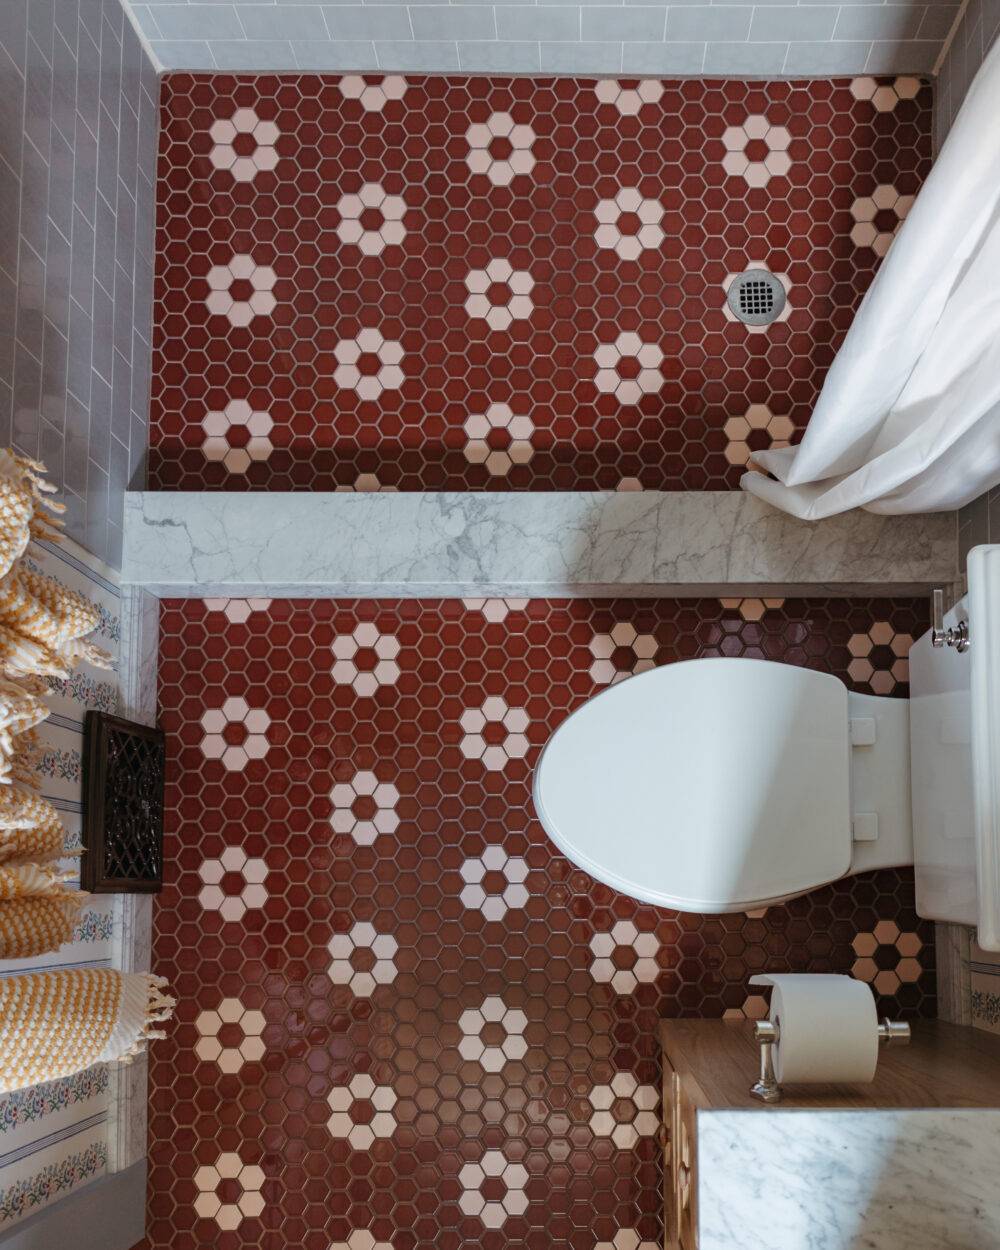 Bathroom and shower floor with small red and pink hexagons in a floral pattern. 